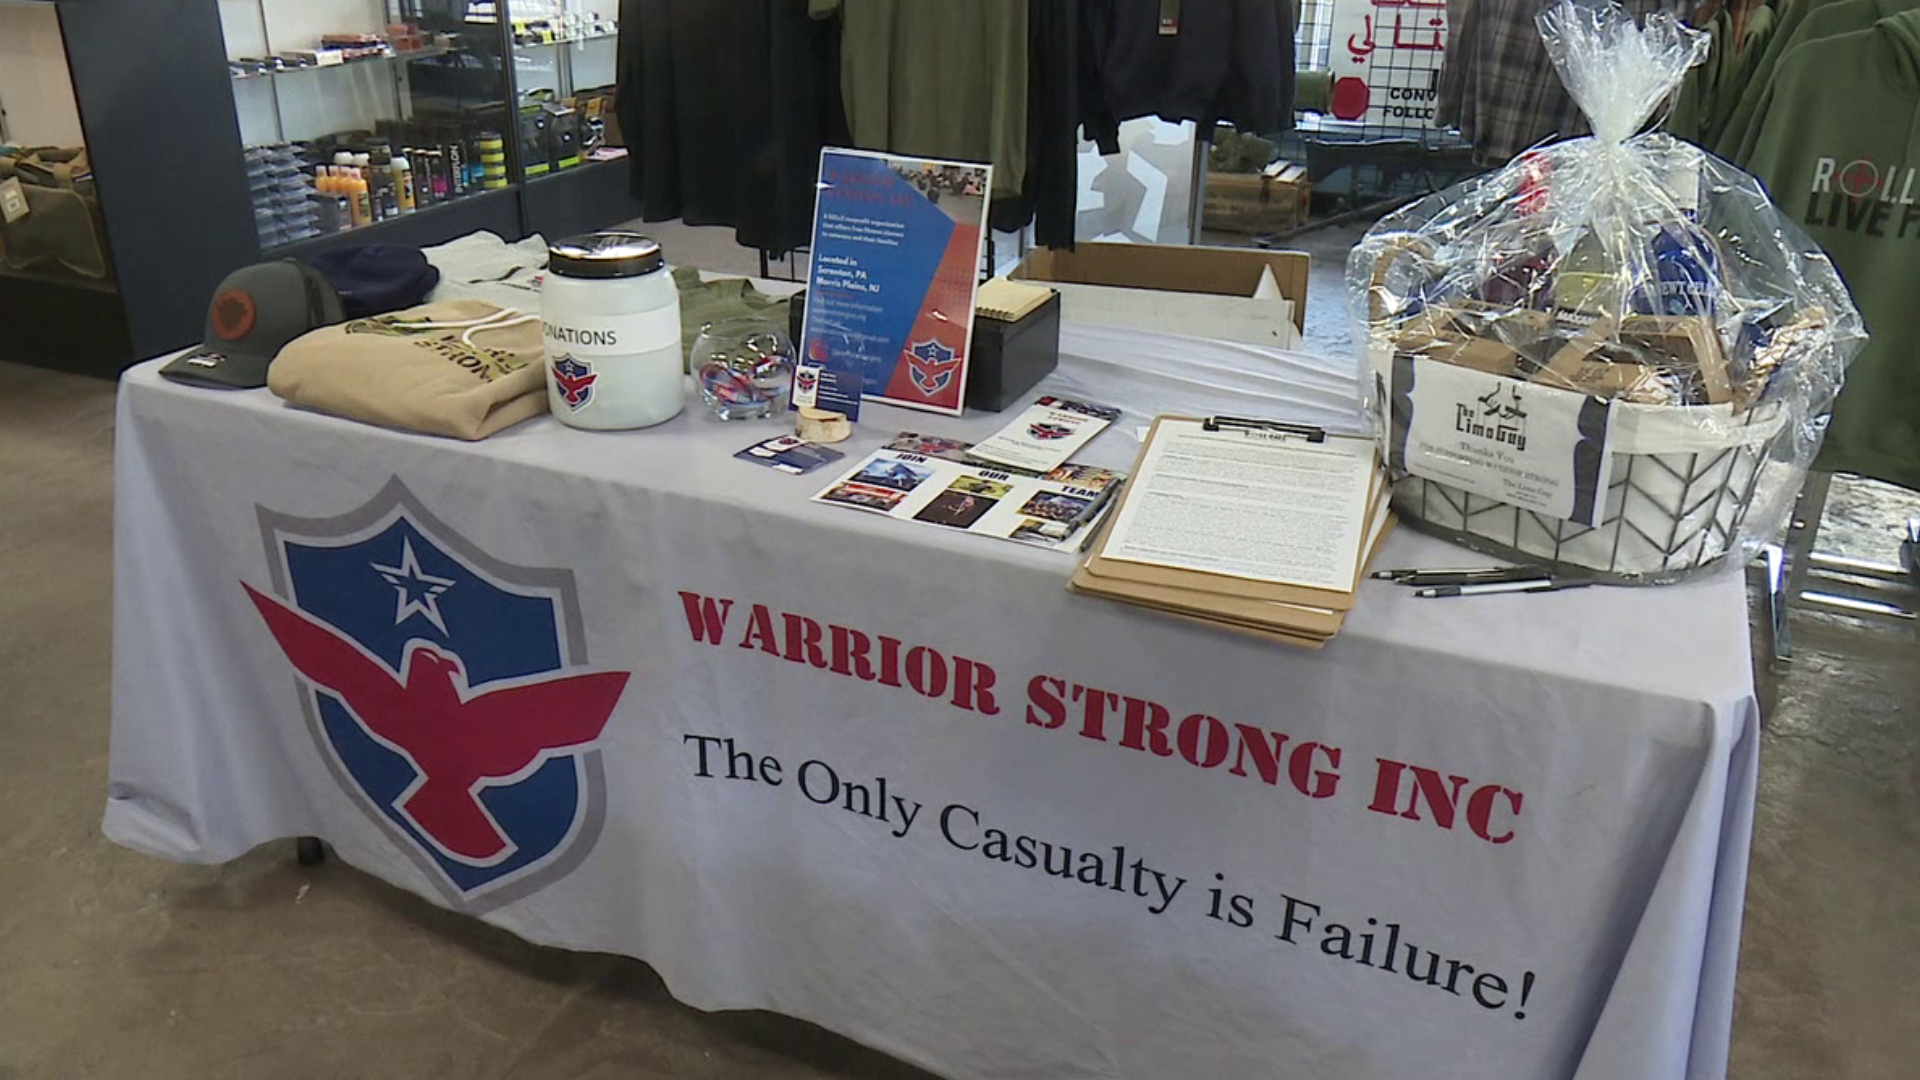 Proceeds went to Warrior Strong, an organization that holds classes to promote health and wellness.